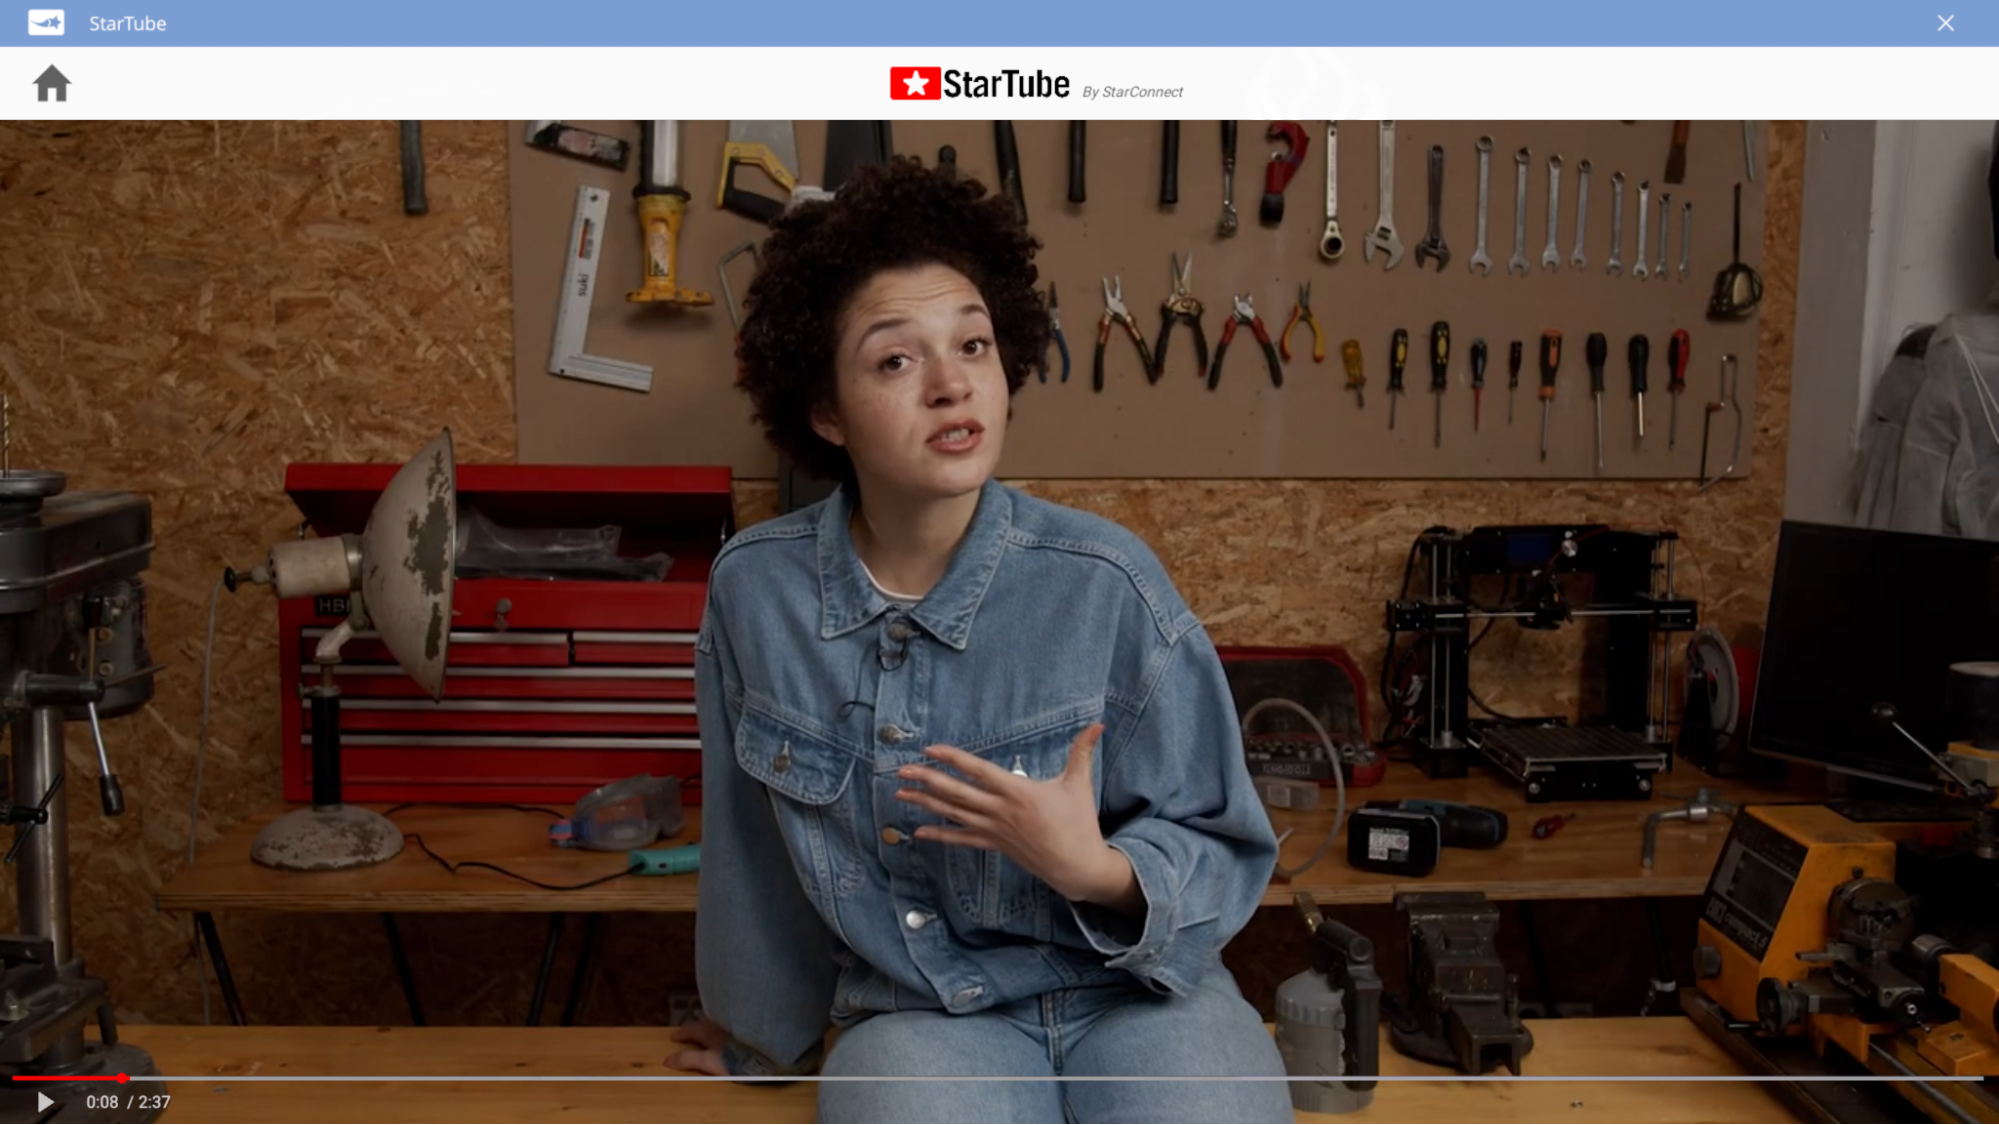 A screenshot of Next Space Rebel’s YouTube parody called StarTube. It’s a screencap of a woman wearing a denim jumpsuit talking as she sits on a workshop table. She is surrounded by tools.